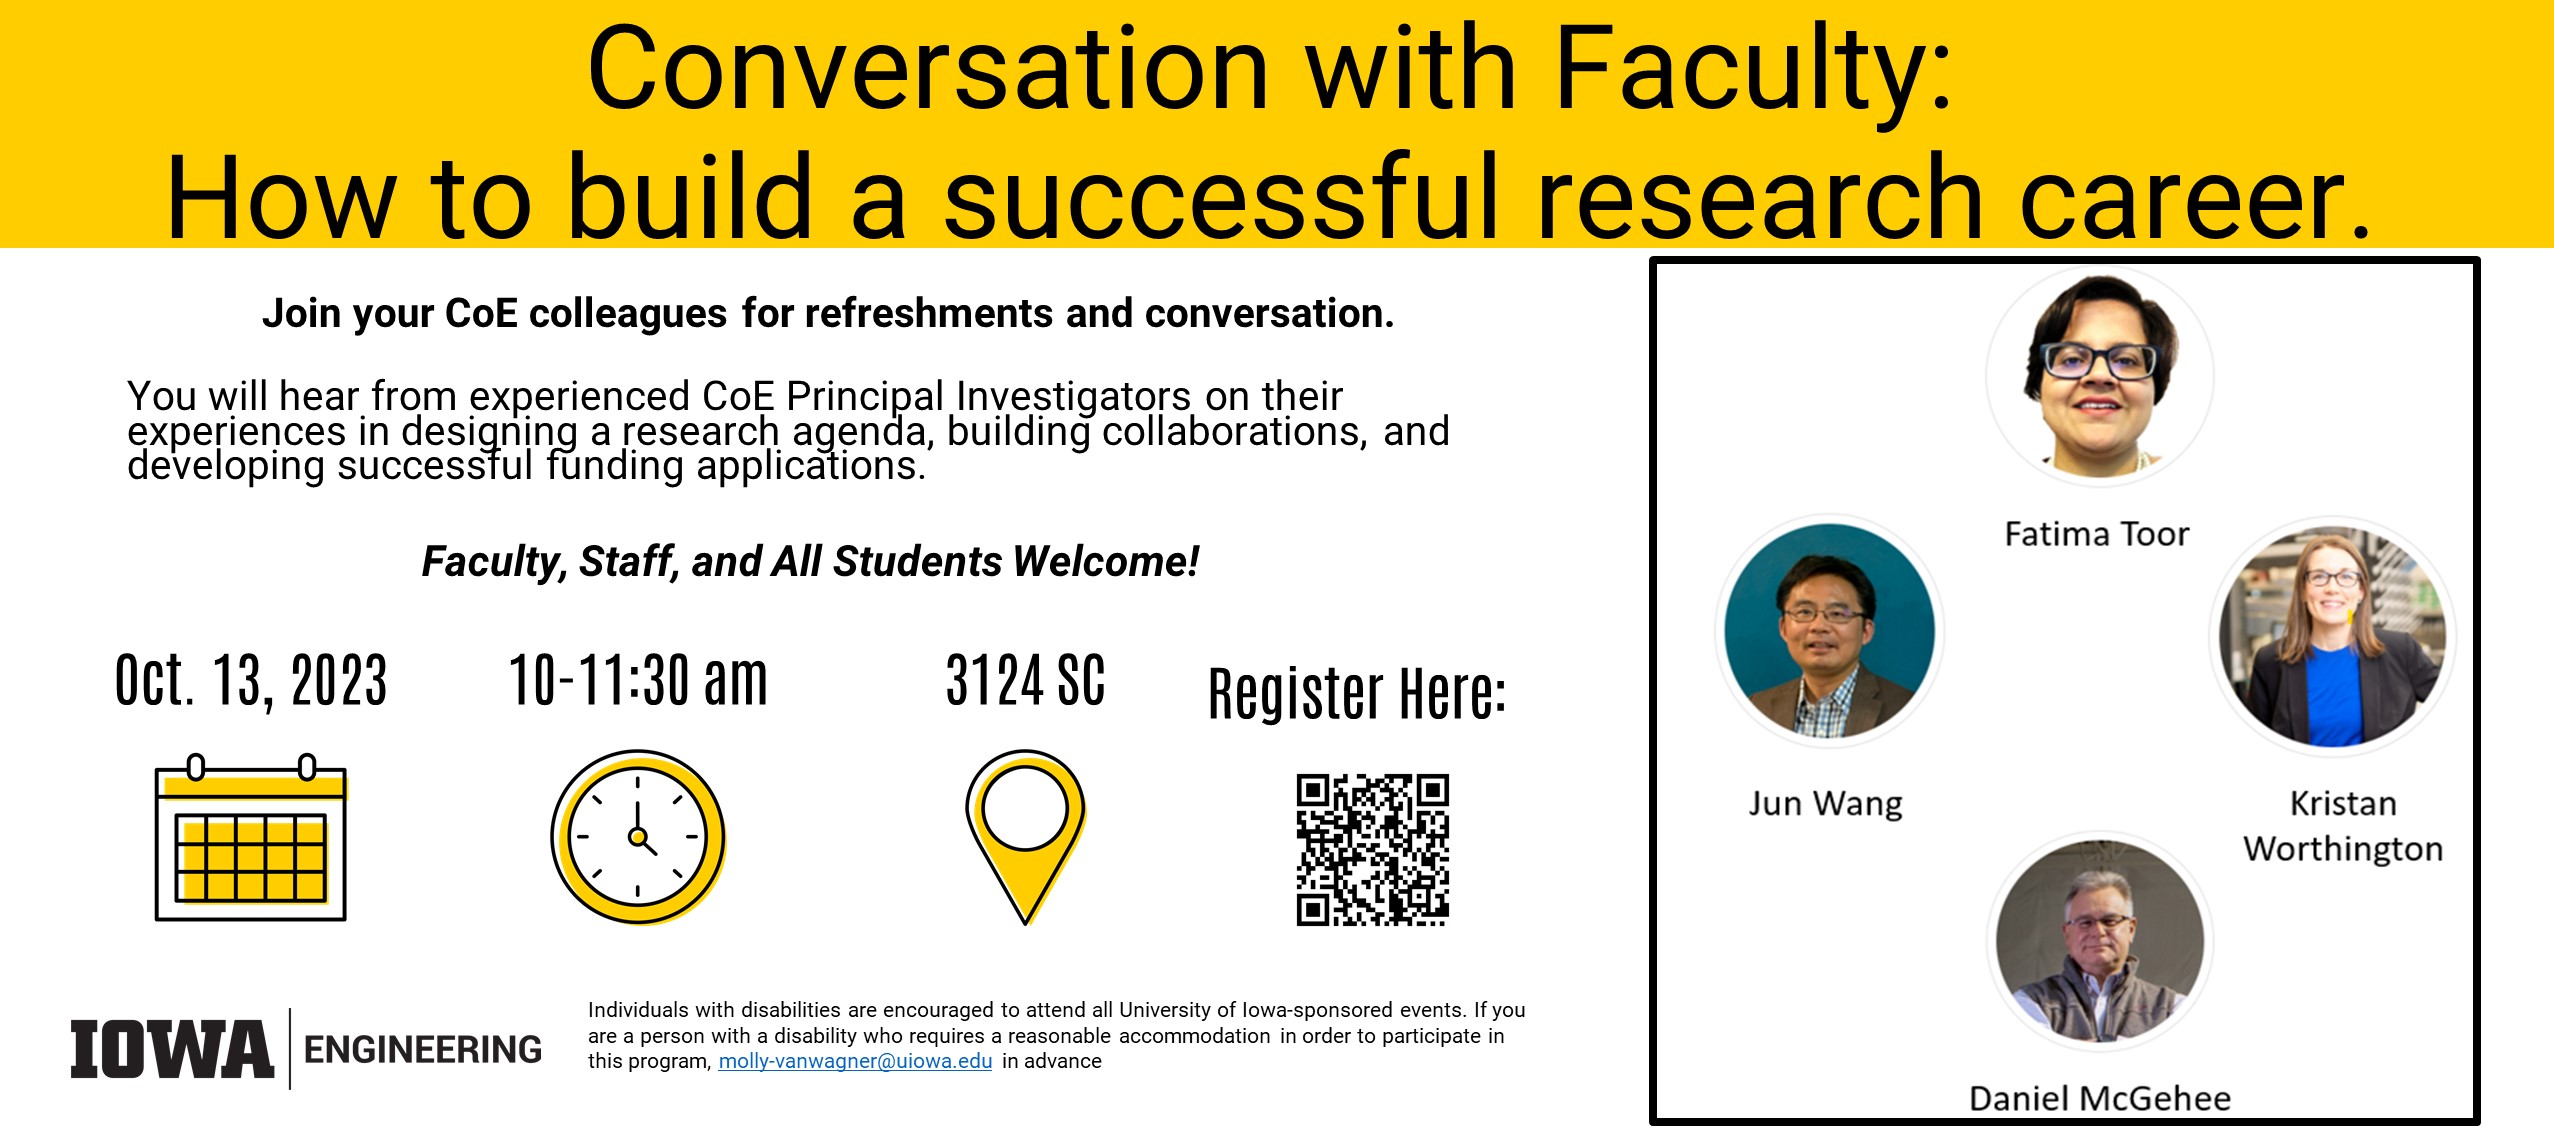 Conversation with faculty